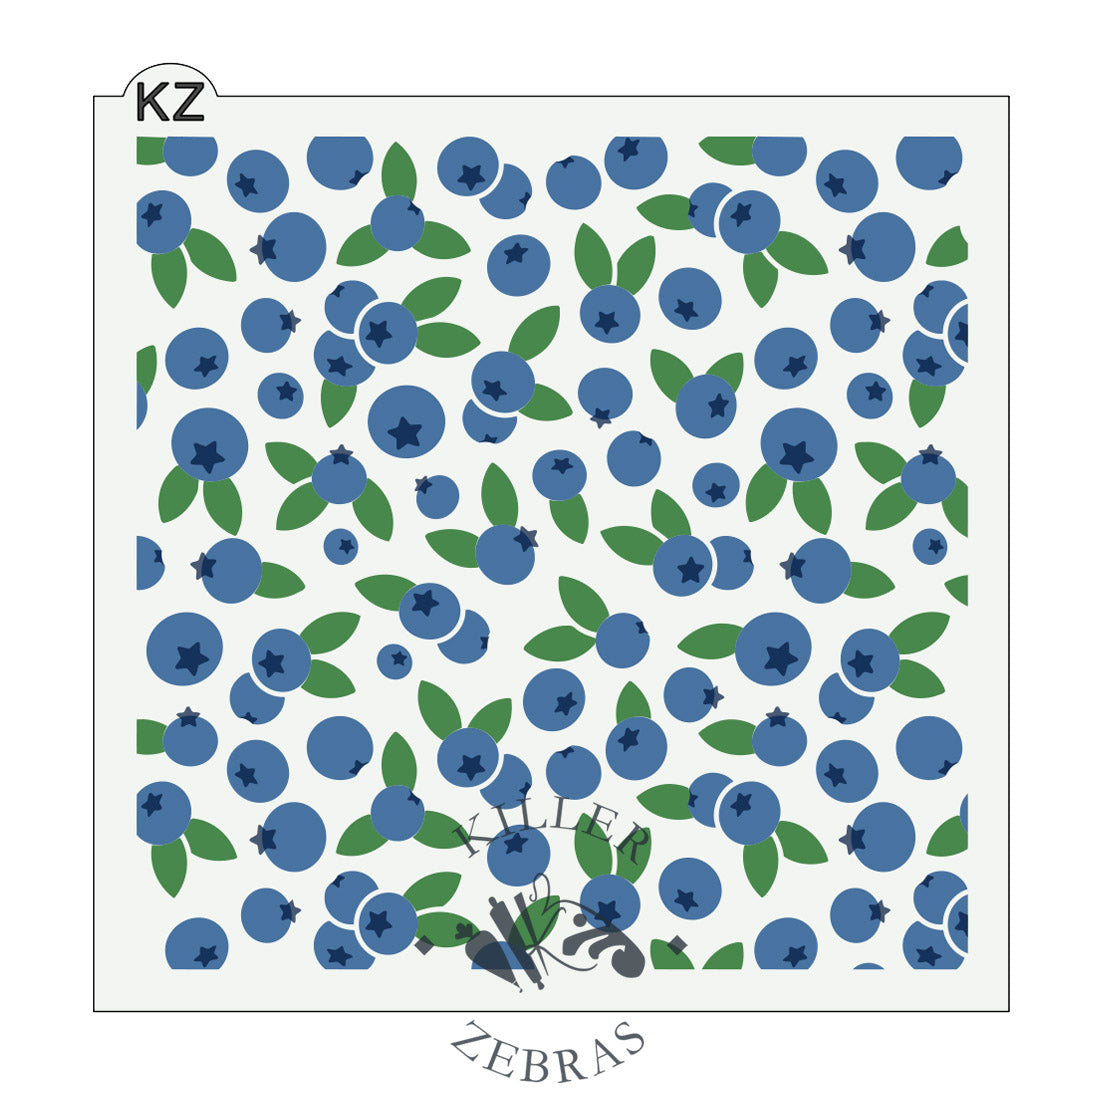 Large, square stencil with blueberries and green leaves filling the square.